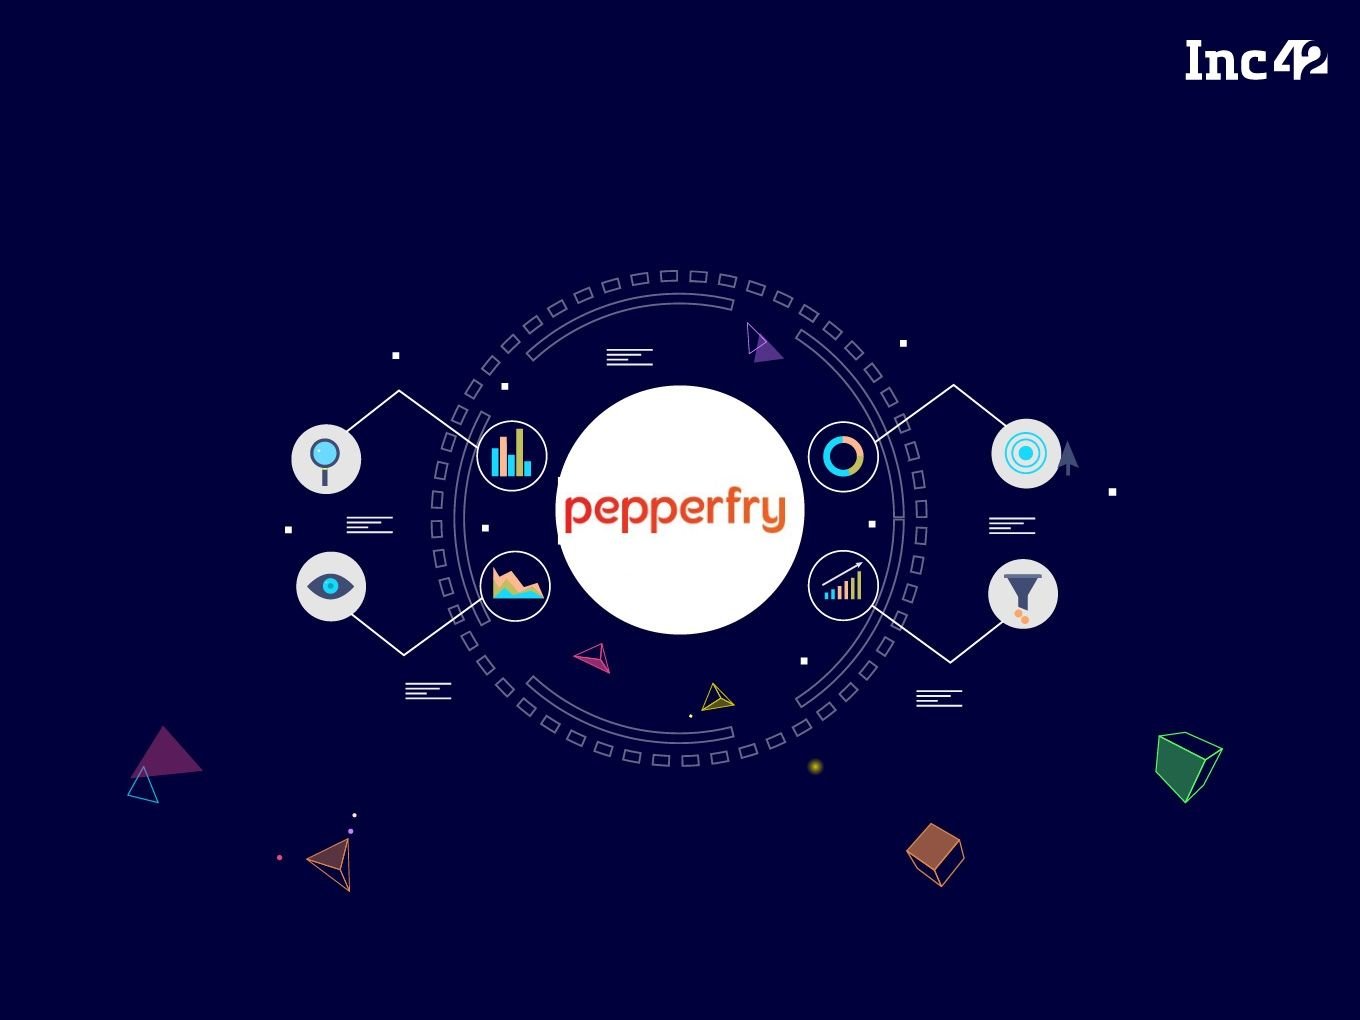 [What The Financials] With IPO Plans, Pepperfry’s Losses Are 88% Of Its Revenues